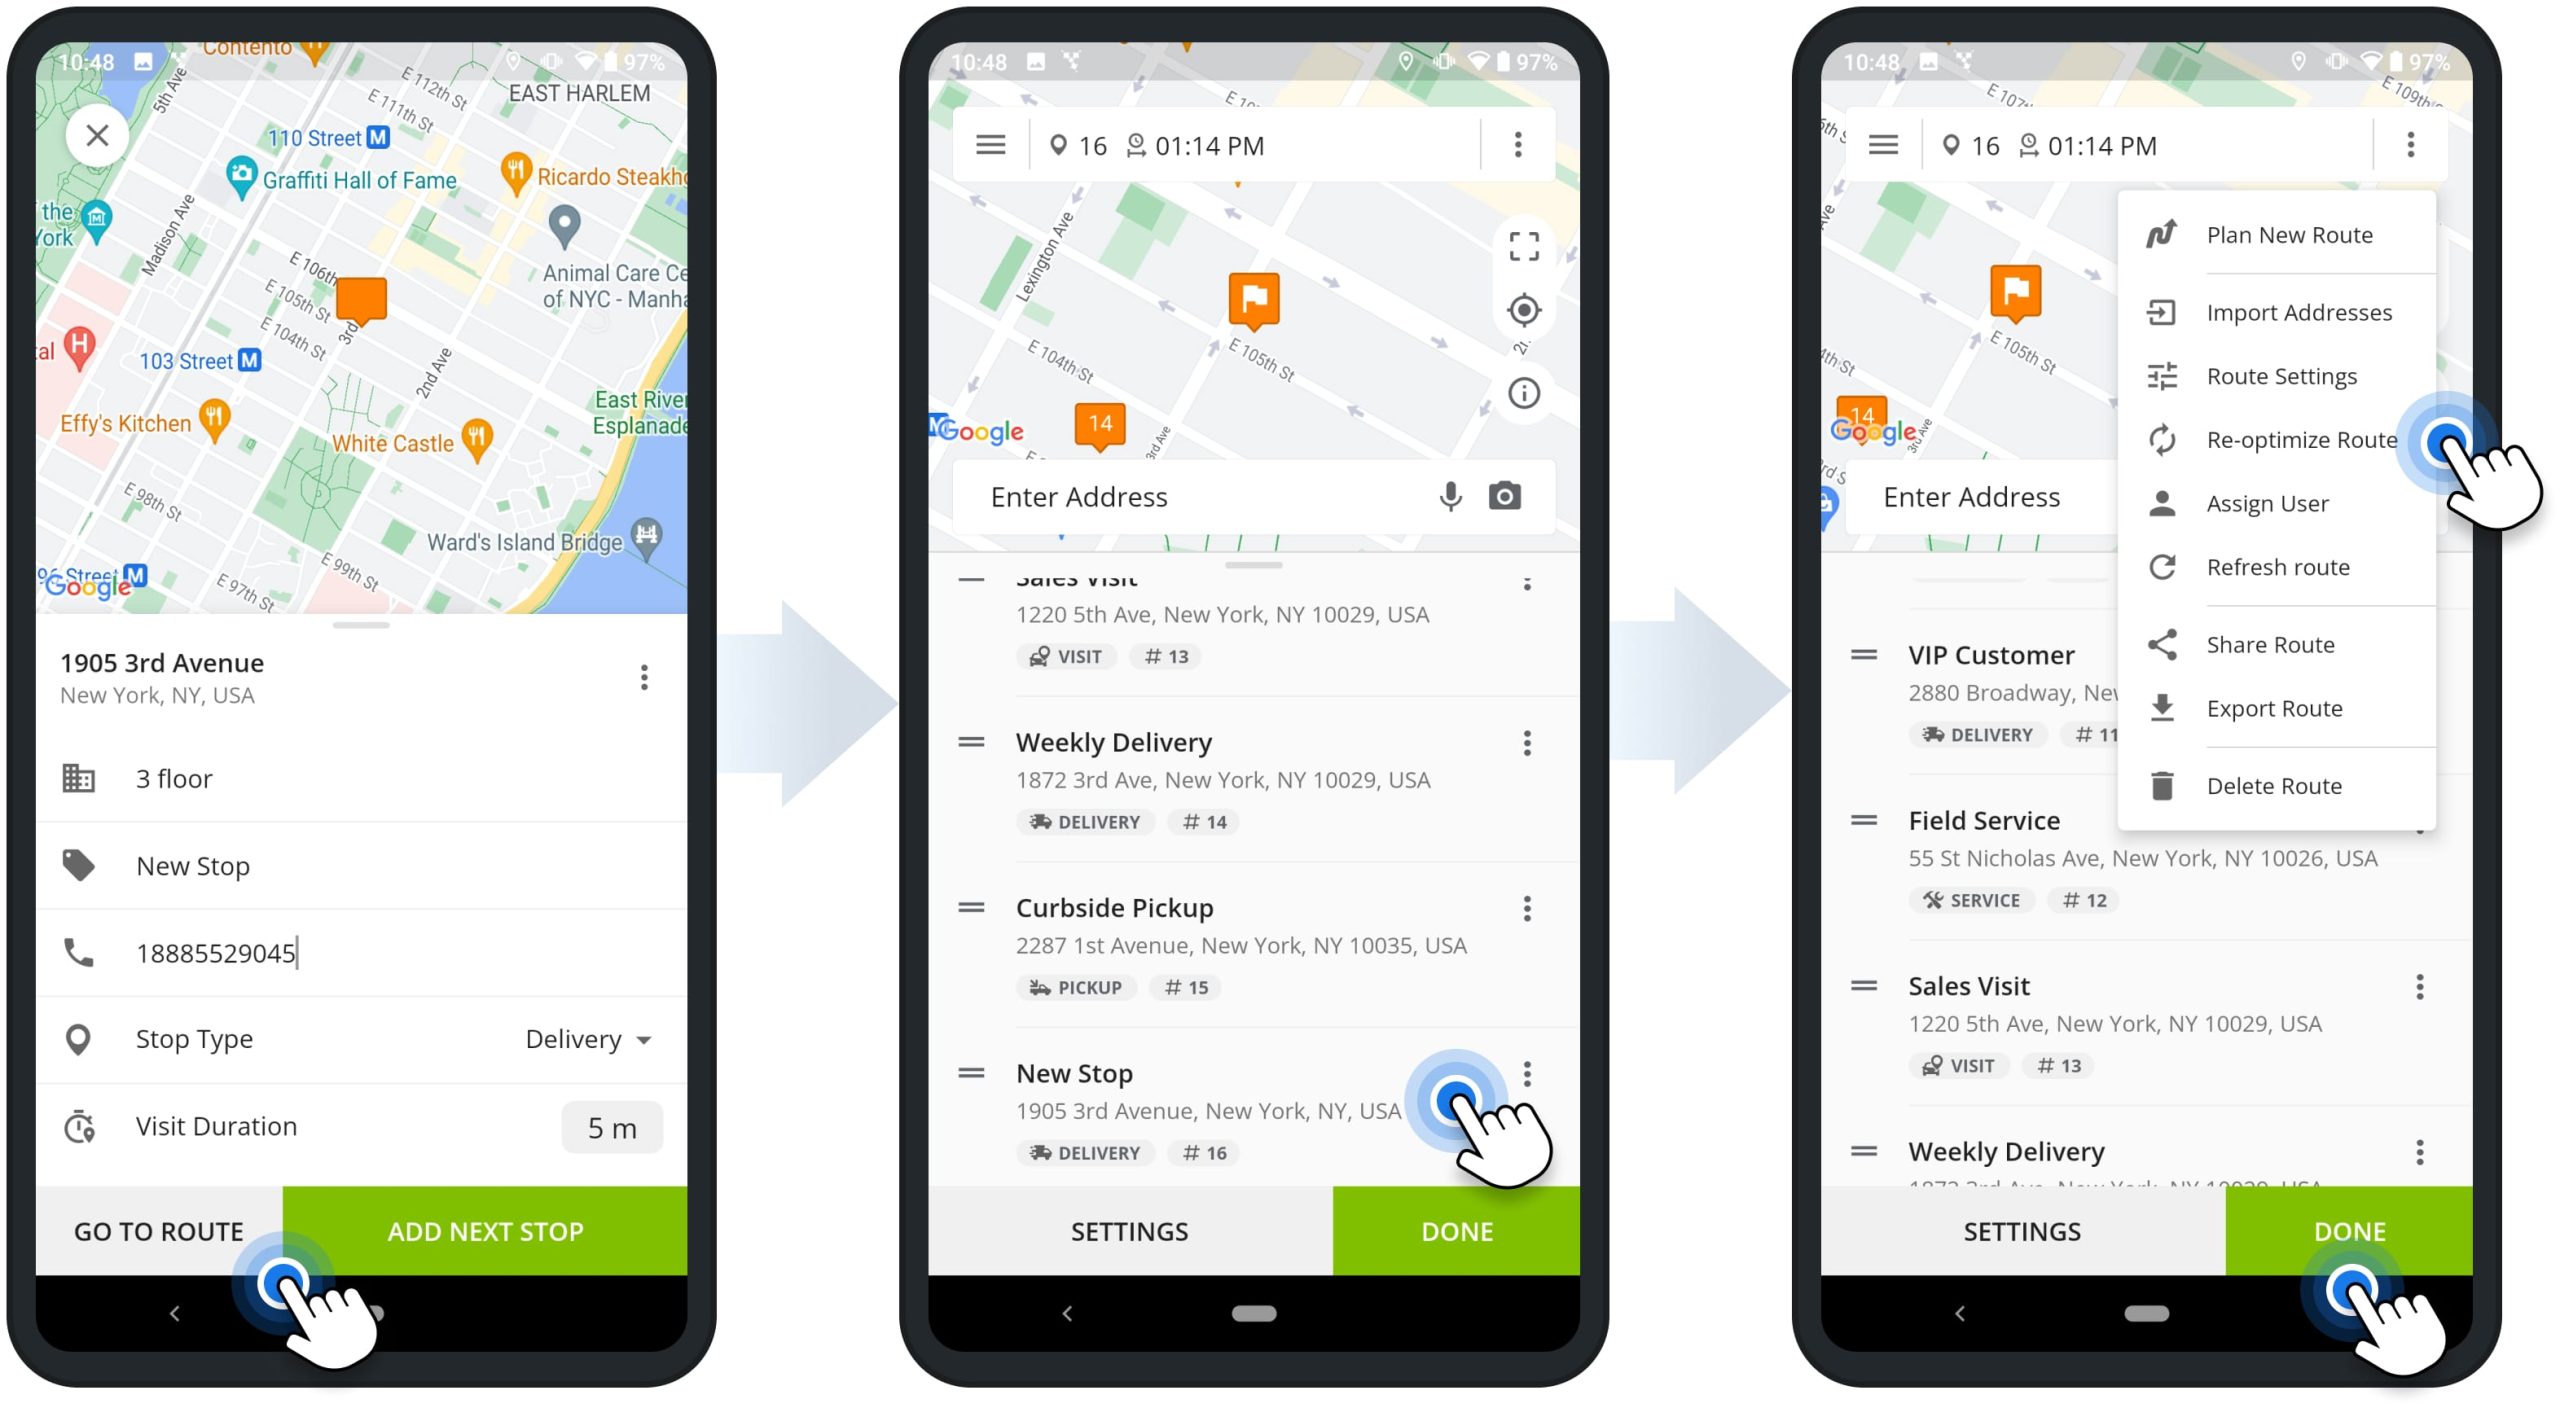 Add stops to planned routes and resequence routes with newly added stop addresses using Route4Me's Android Route Planning app.